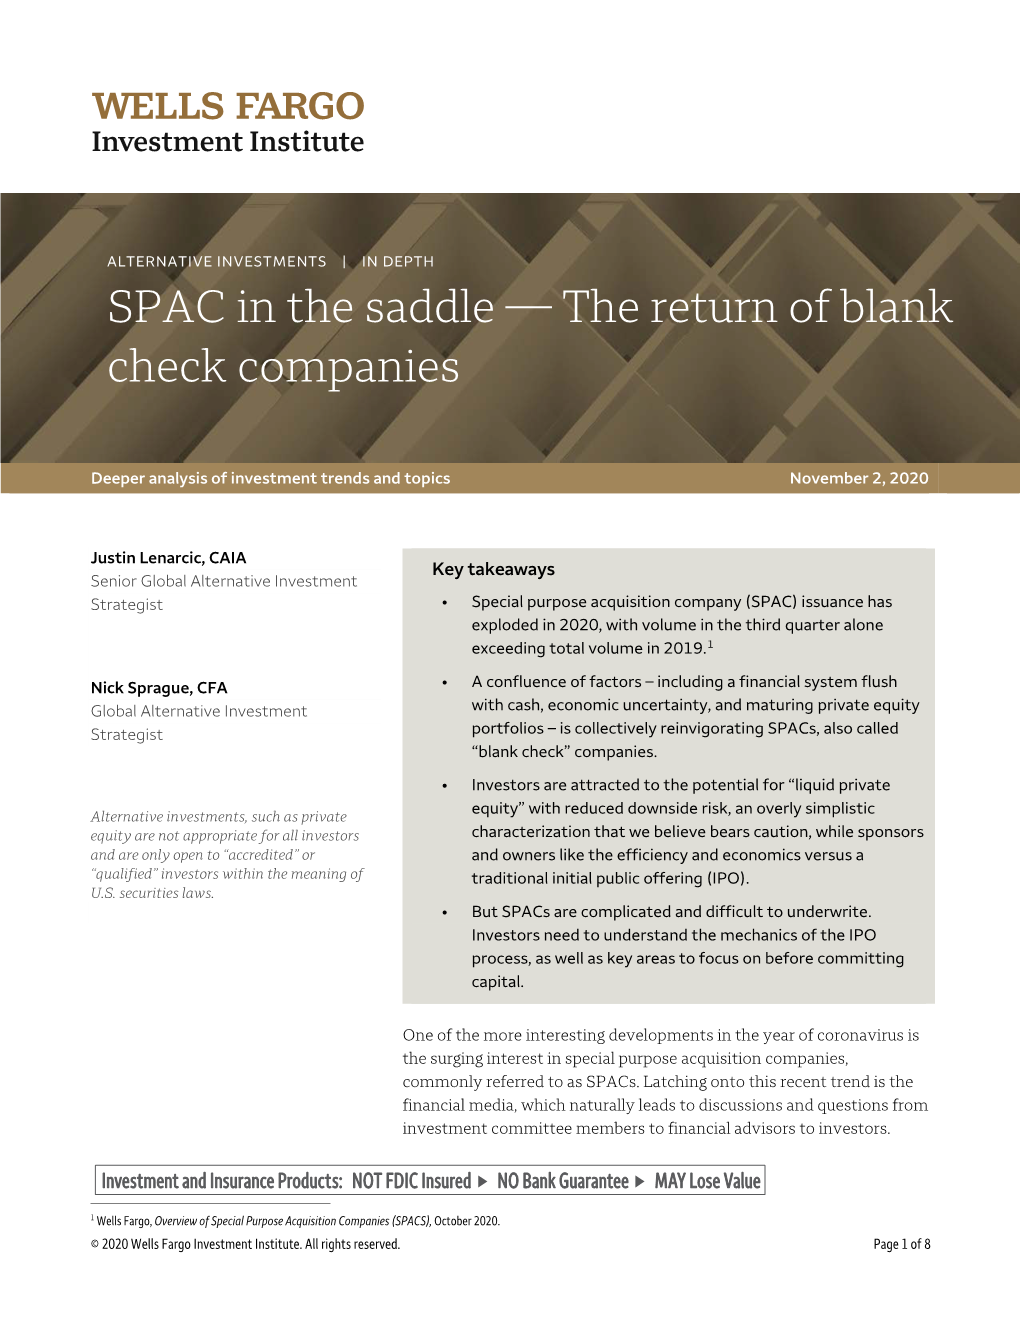 SPAC in the Saddle — the Return of Blank Check Companies